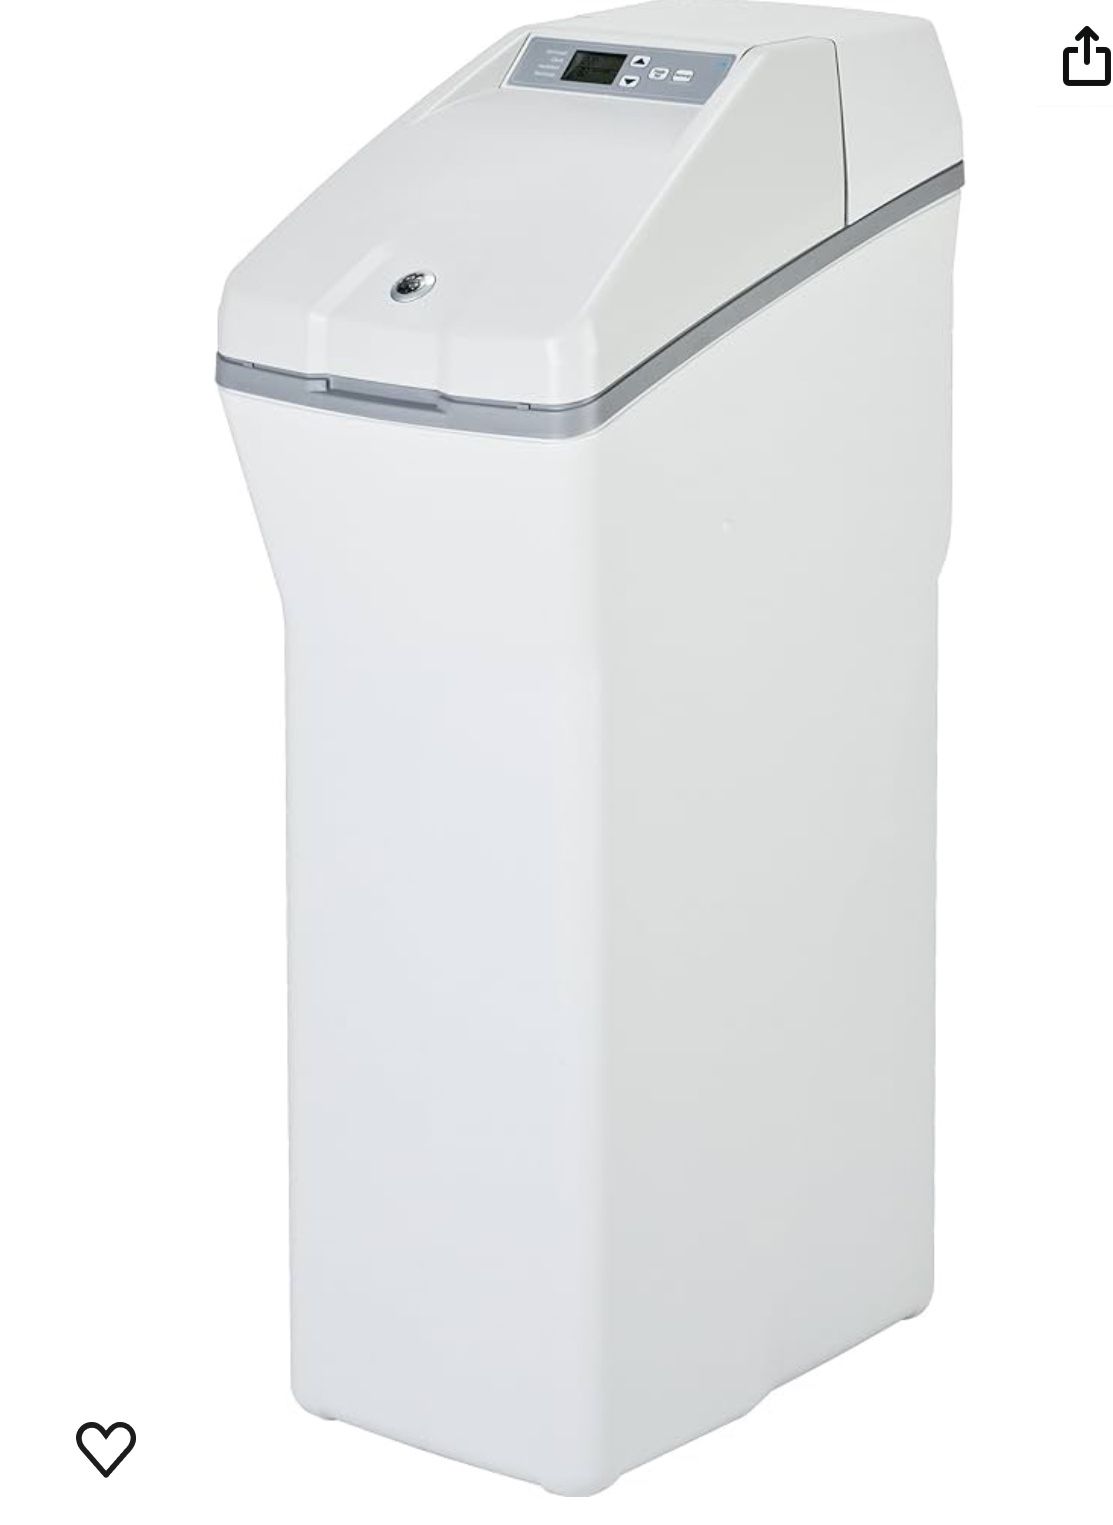 GE Water Softener System | 30,000 Grain | Powder | Reduce Hard Mineral Levels at Water Source | Reduce Salt Consumption | Improve Water Quality for Dr